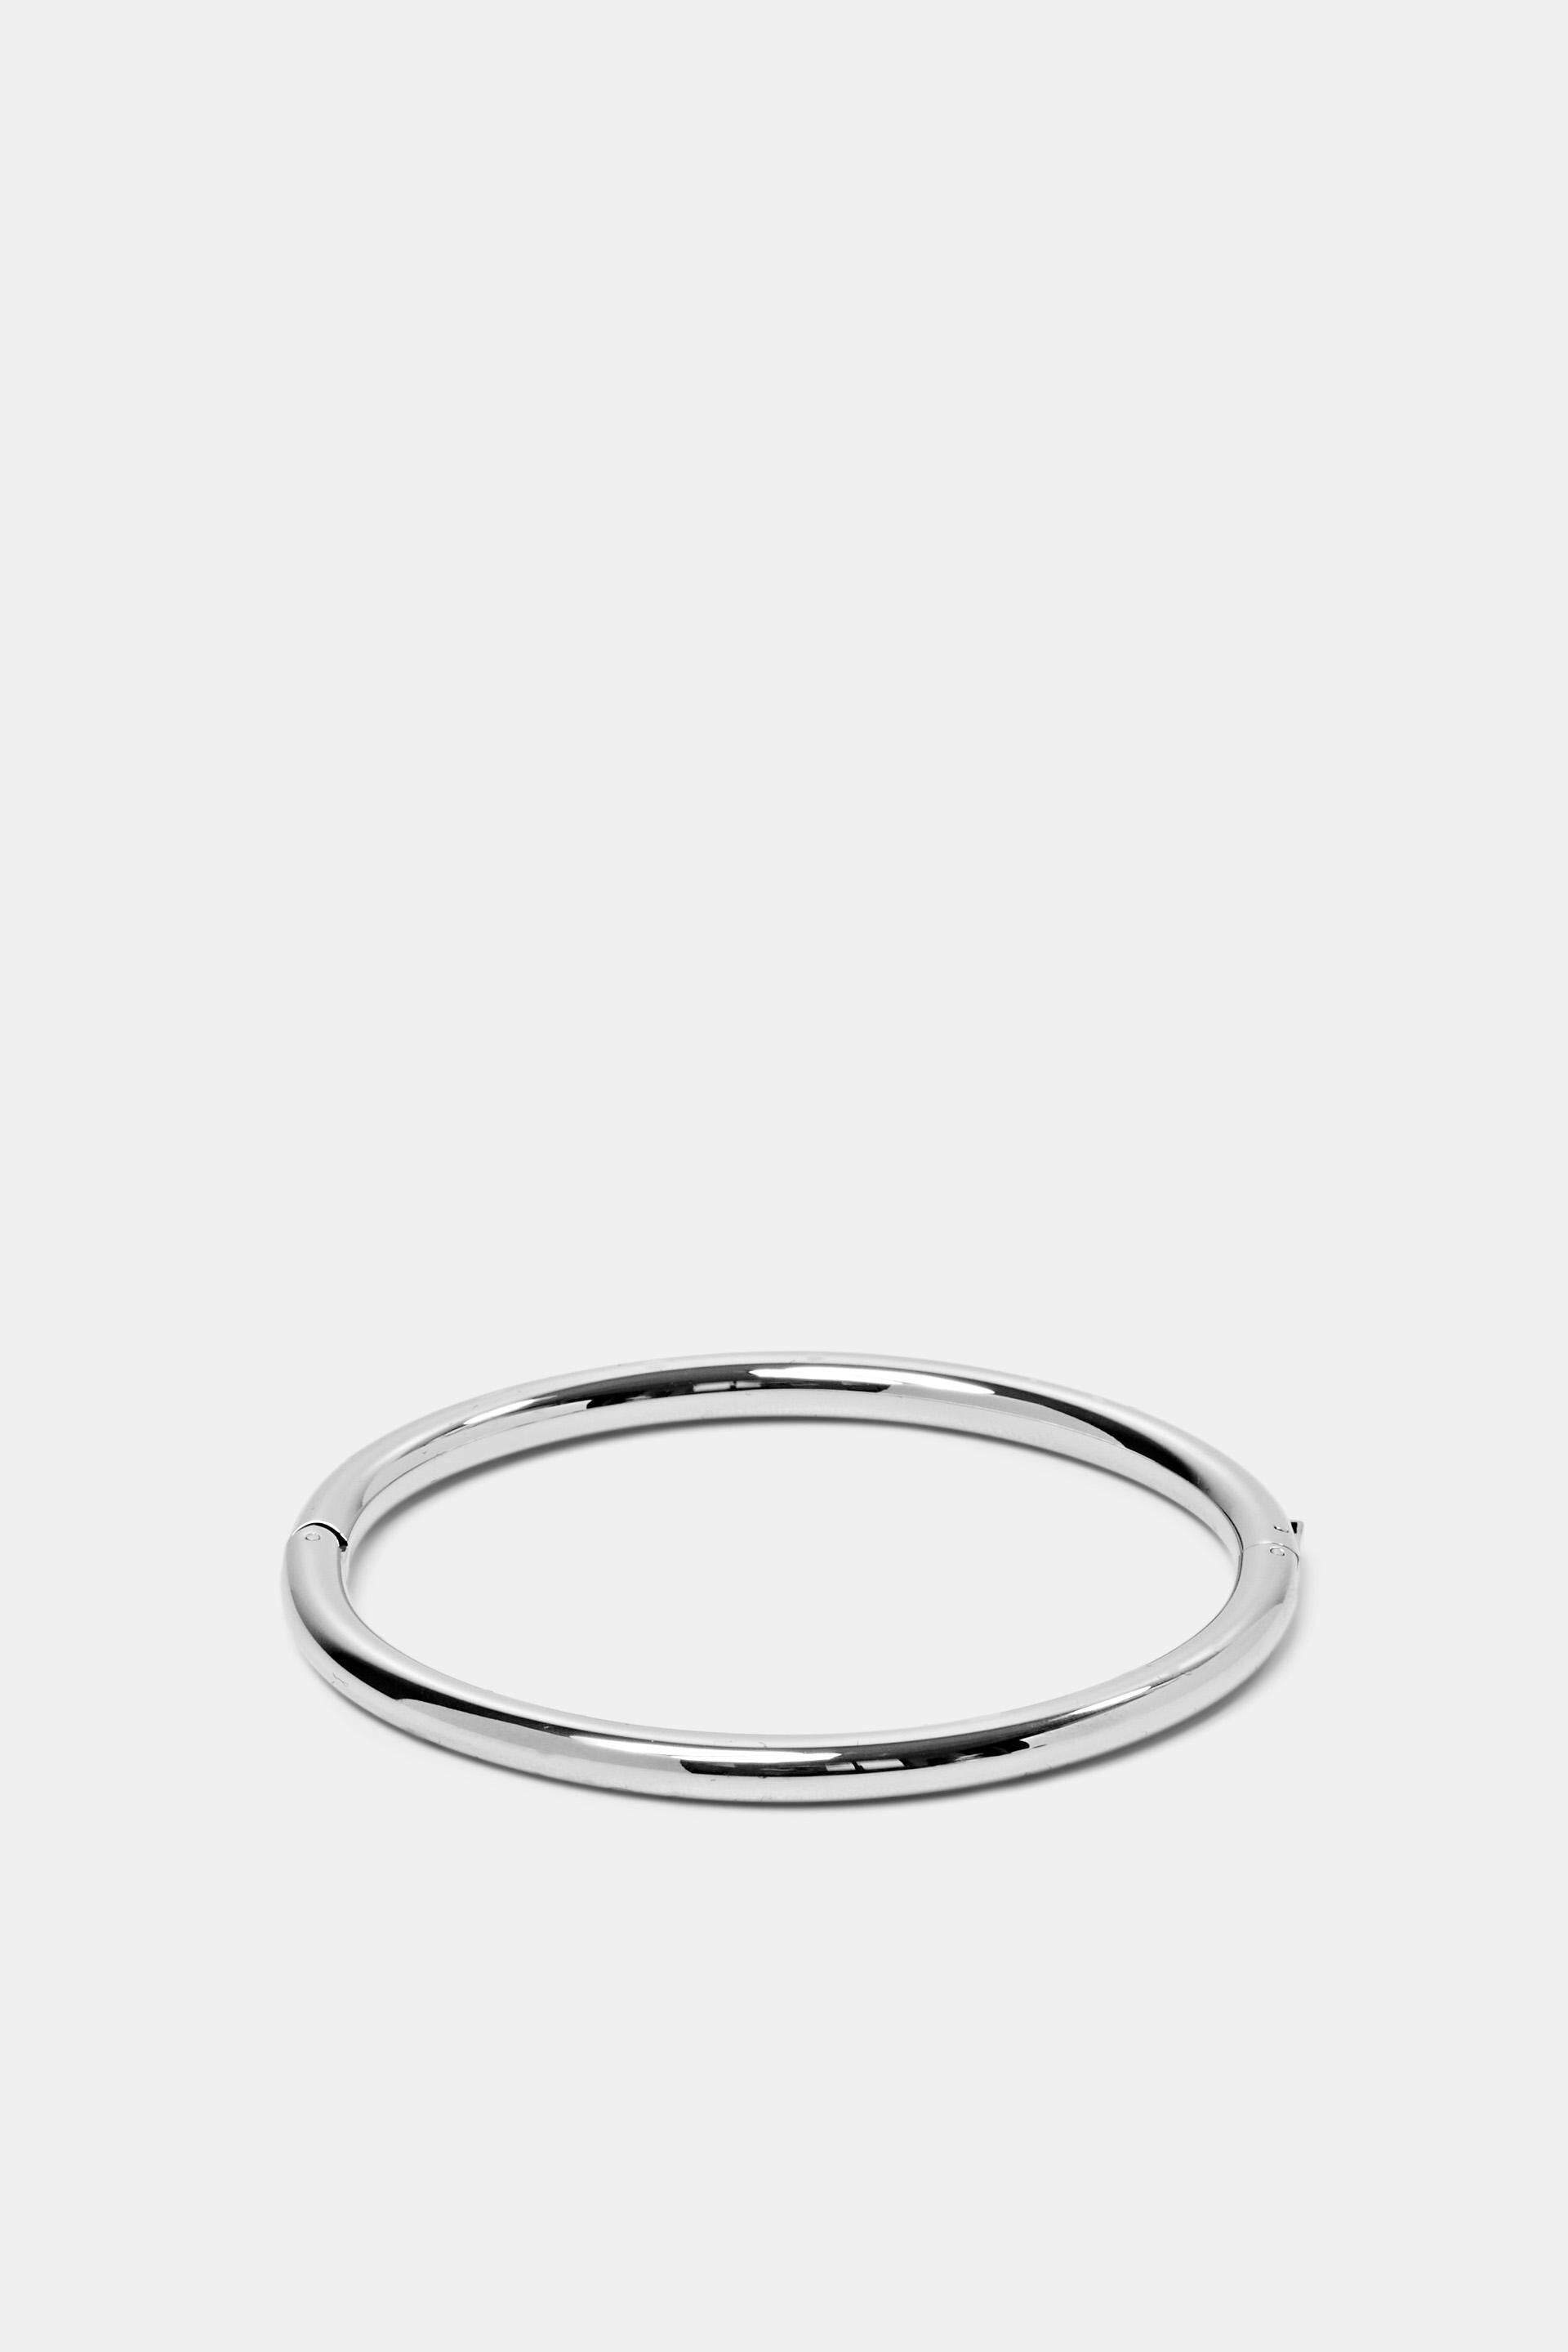 Esprit made steel stainless of Bangle